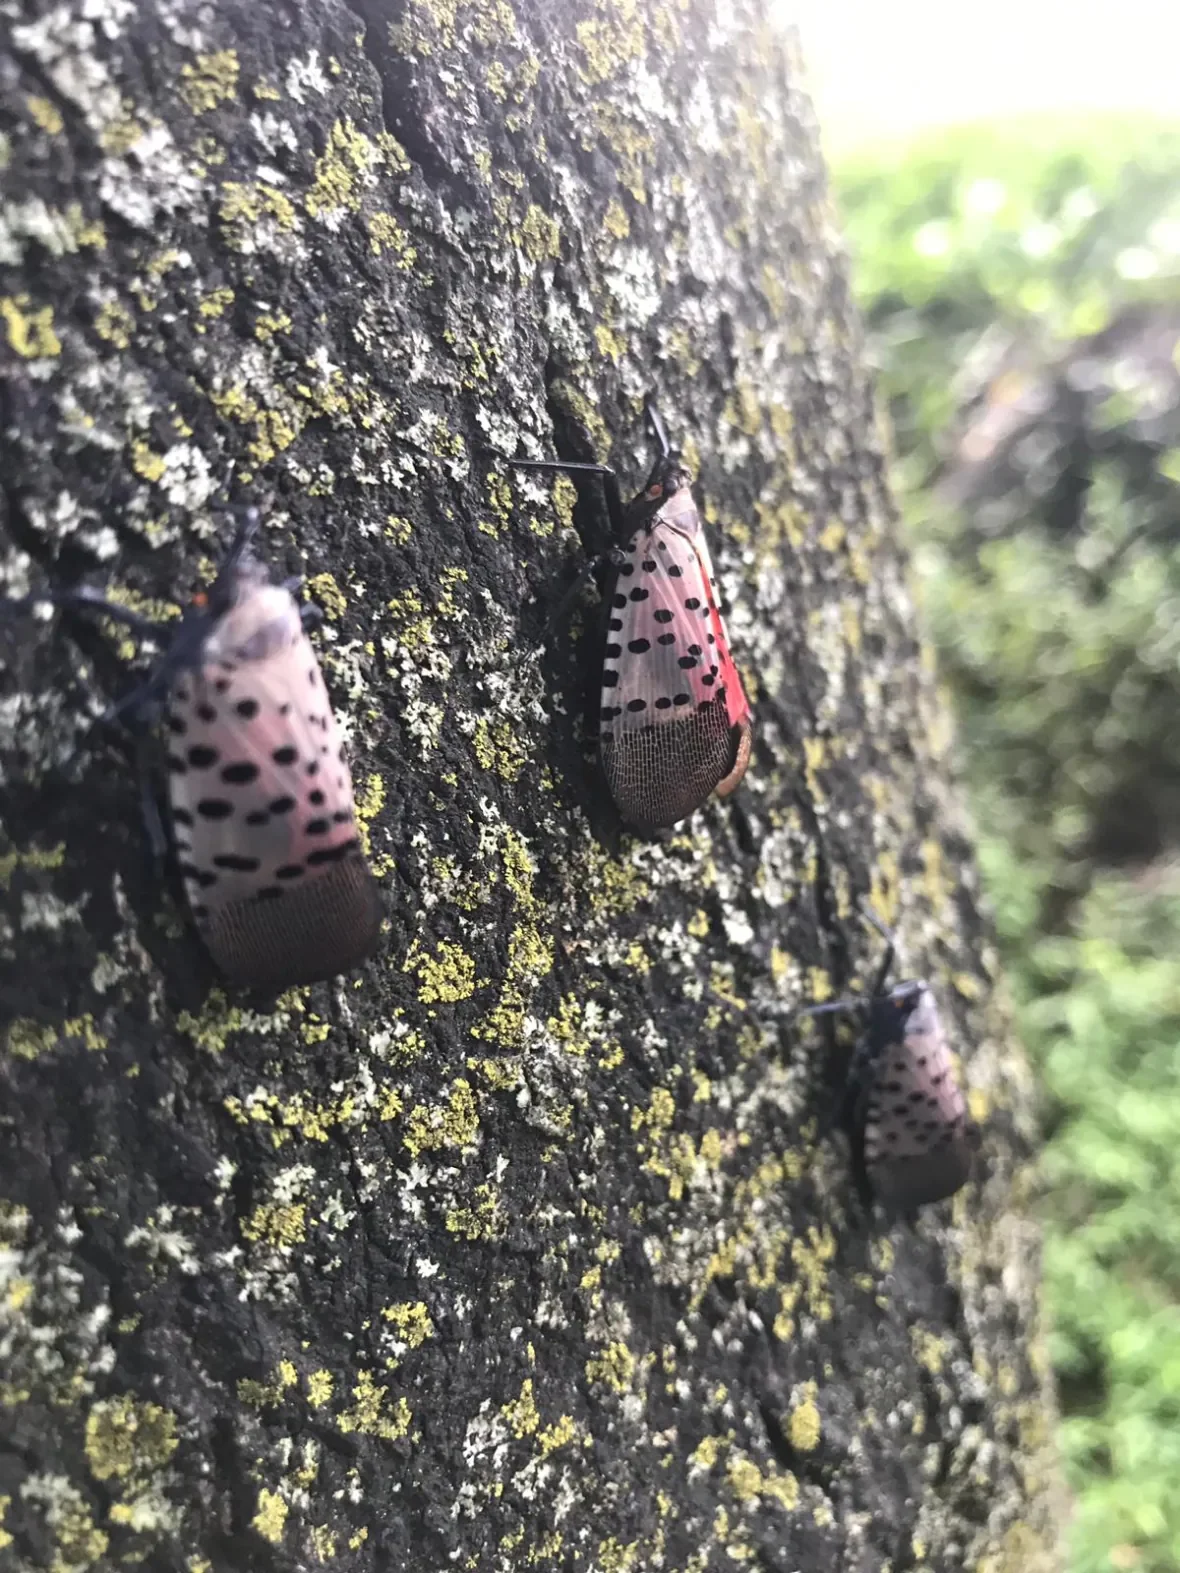 spotted-lanternfly (1)/Courtesy of the Invasive Species Centre via CBC